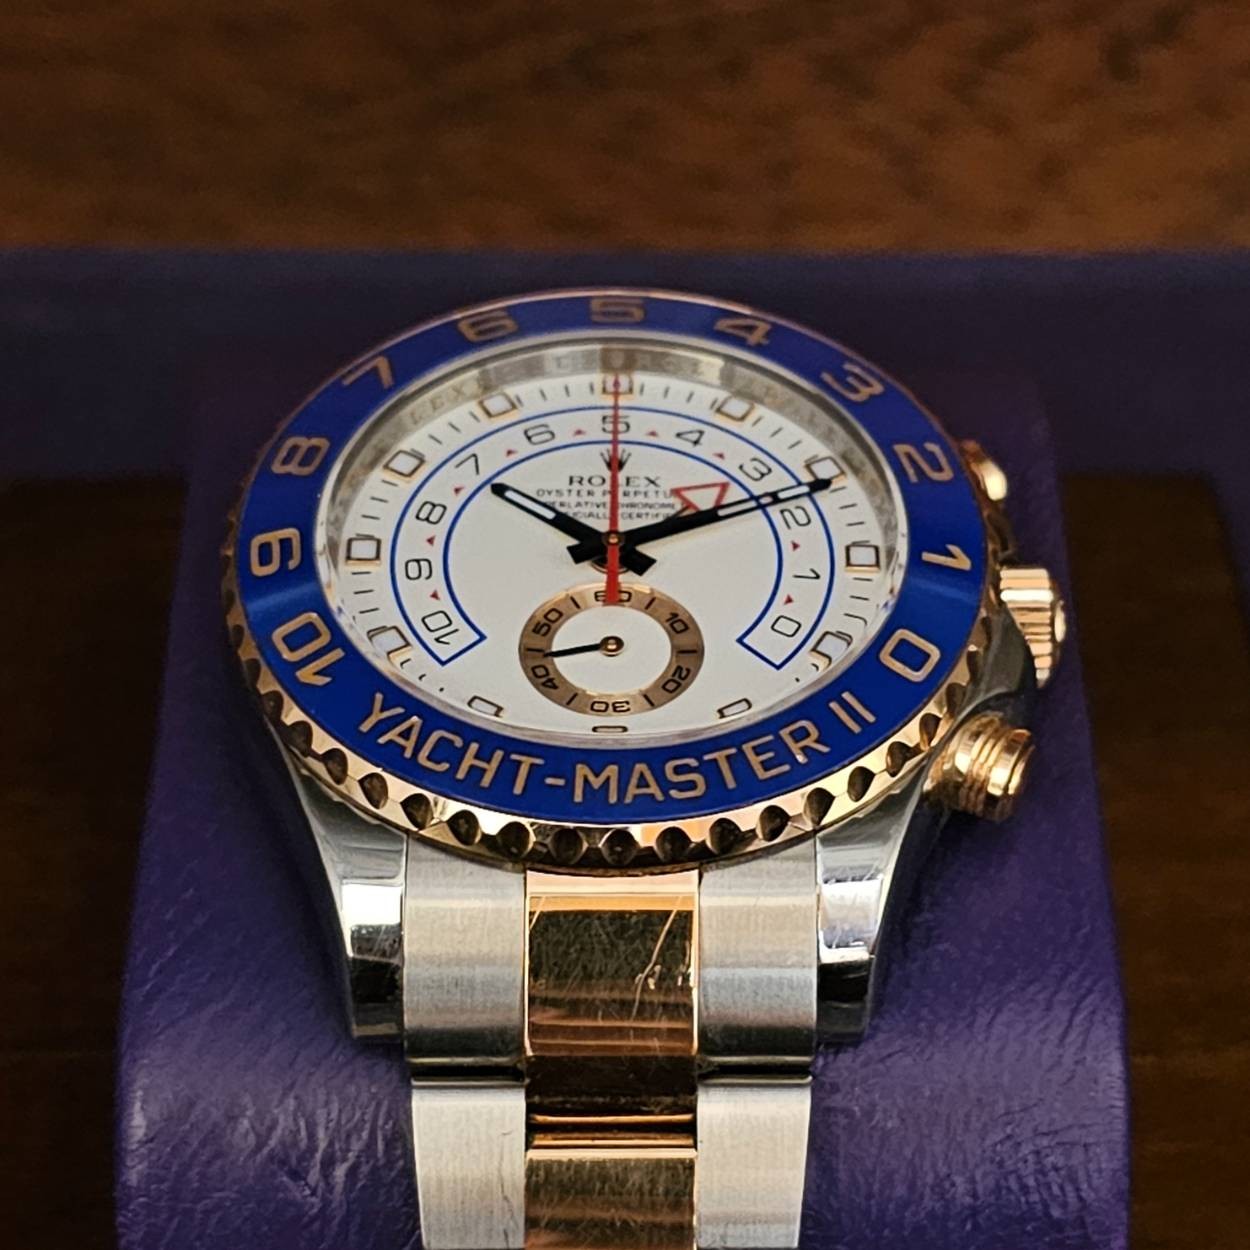 Rolex Yacht-Master 2 Two tone